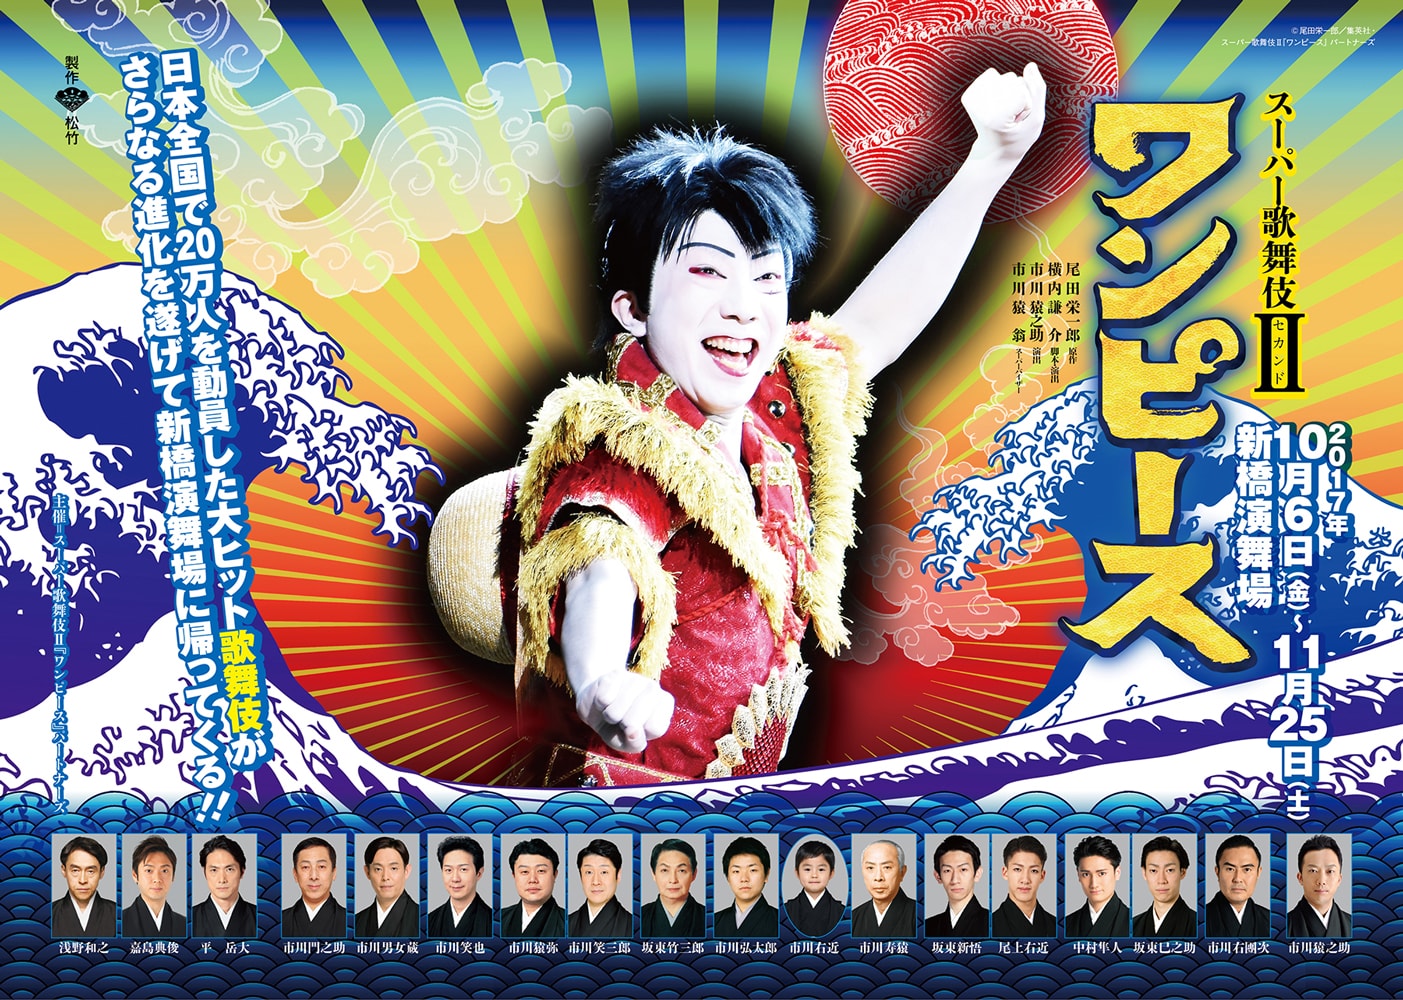 Super Kabuki II　ONE PIECE  [Alternate Cast Performance for ‘The Challenge of the Straw Hat’] at the shinbashi